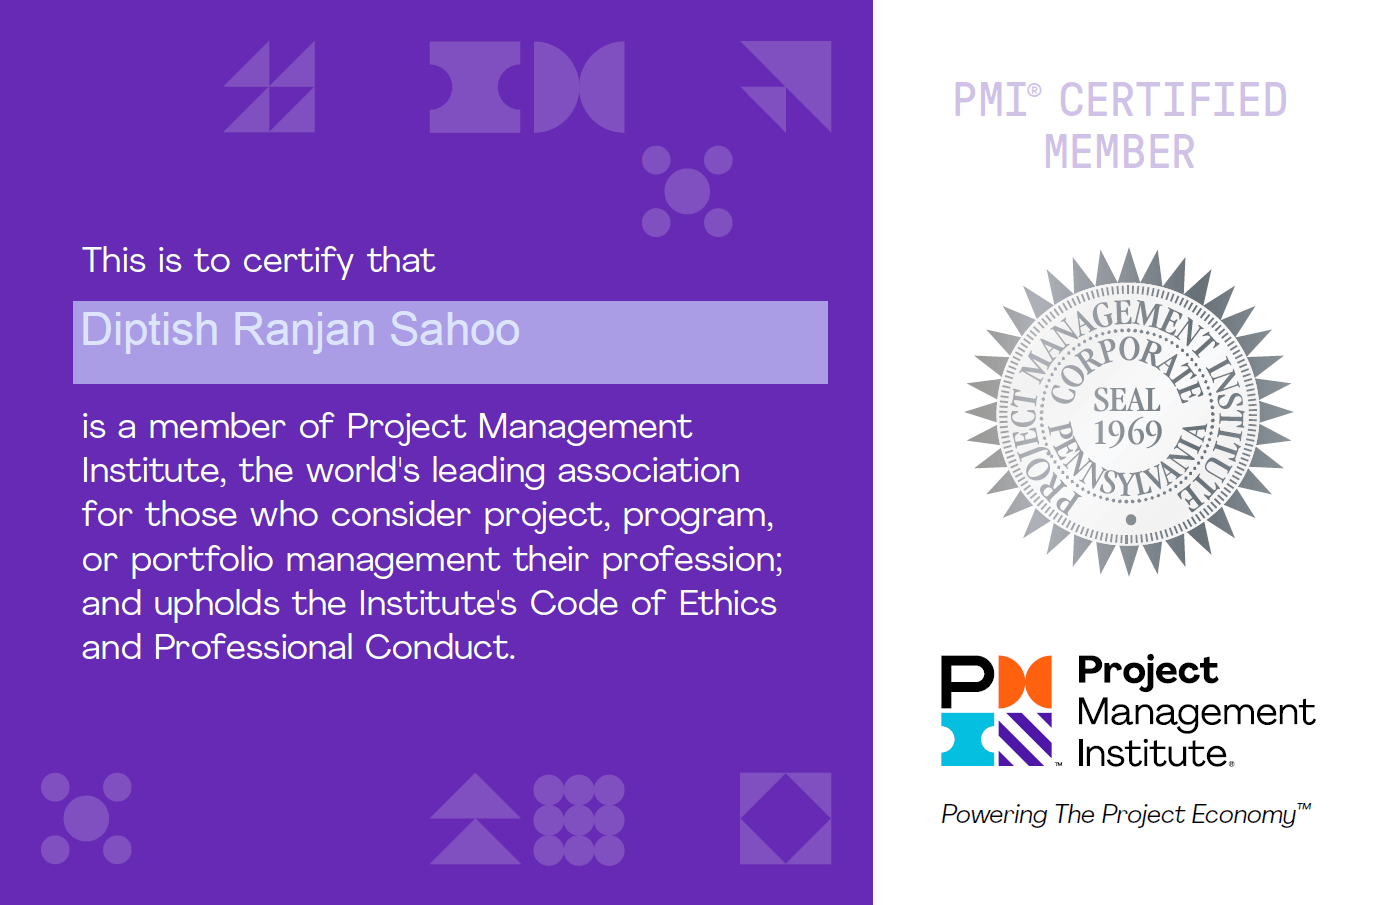 Project Management Institute Membership Benefits for PMP Aspirants